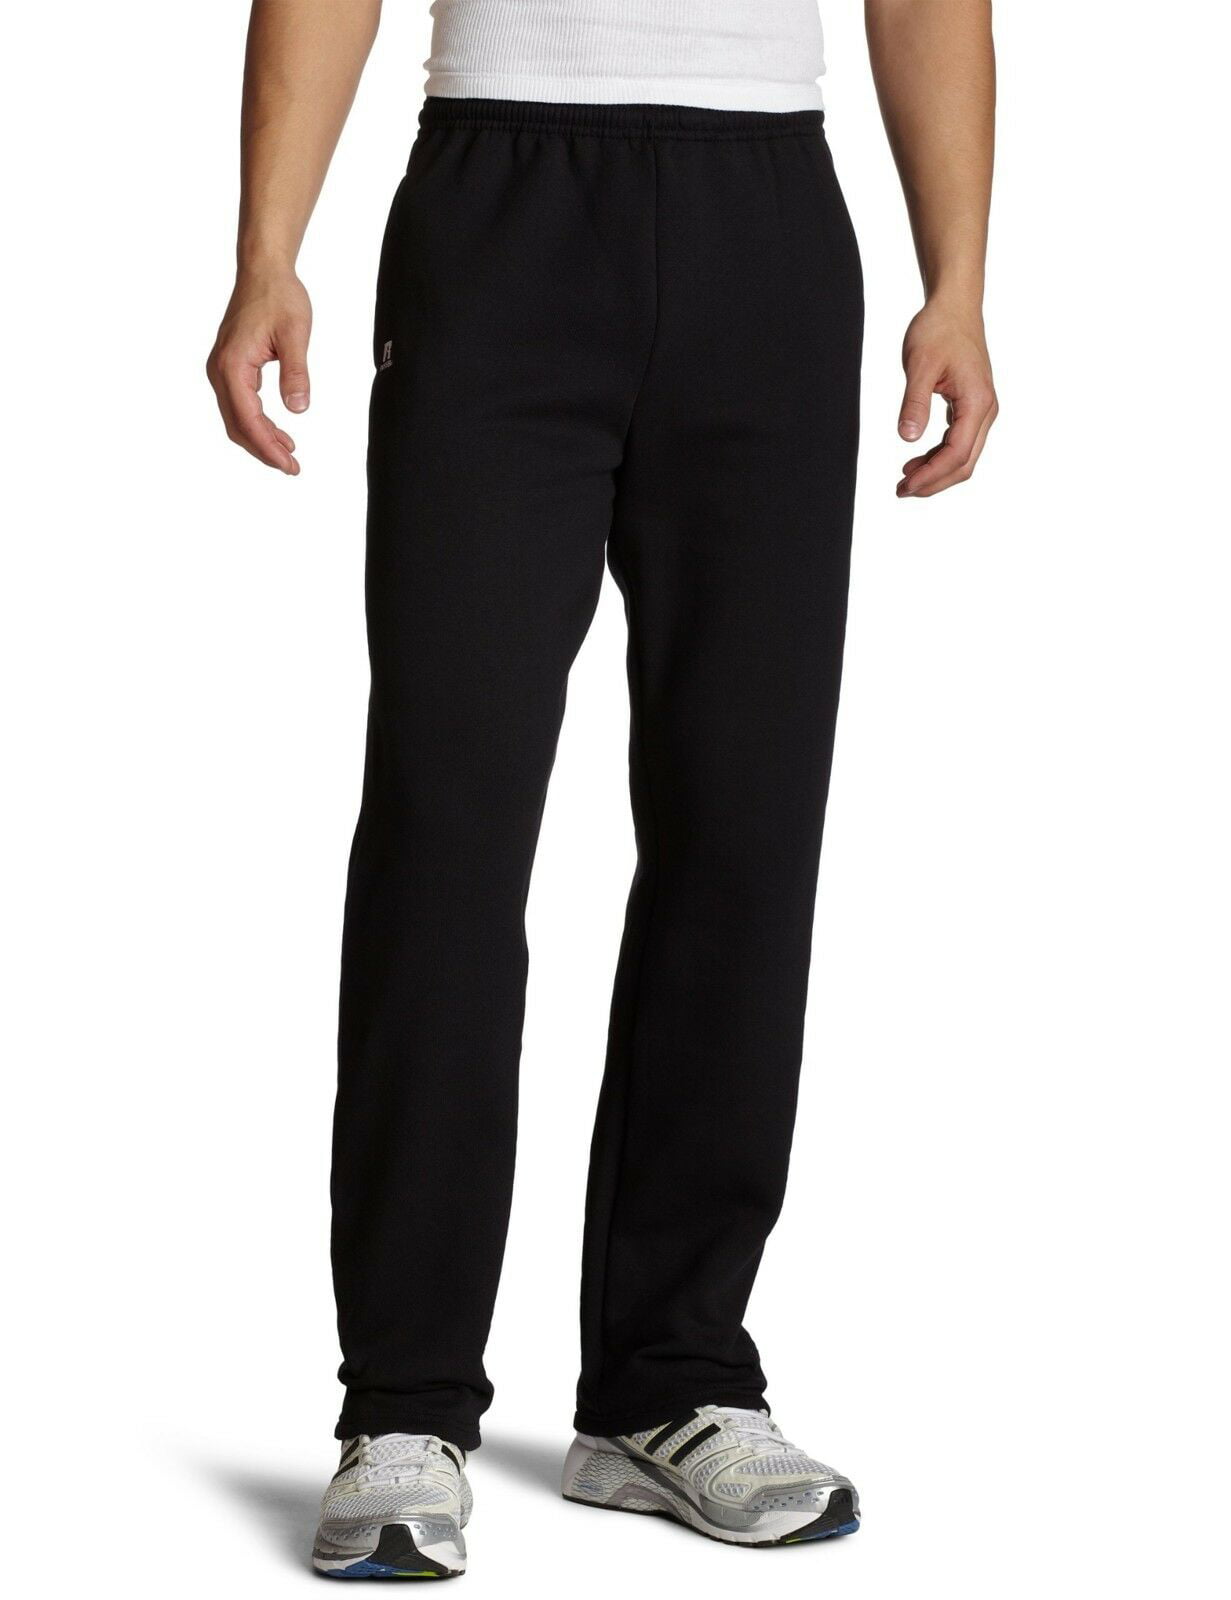 Russell Athletic Pants - Men Pants Deep Pull-On Stretch Sweatpants XL ...